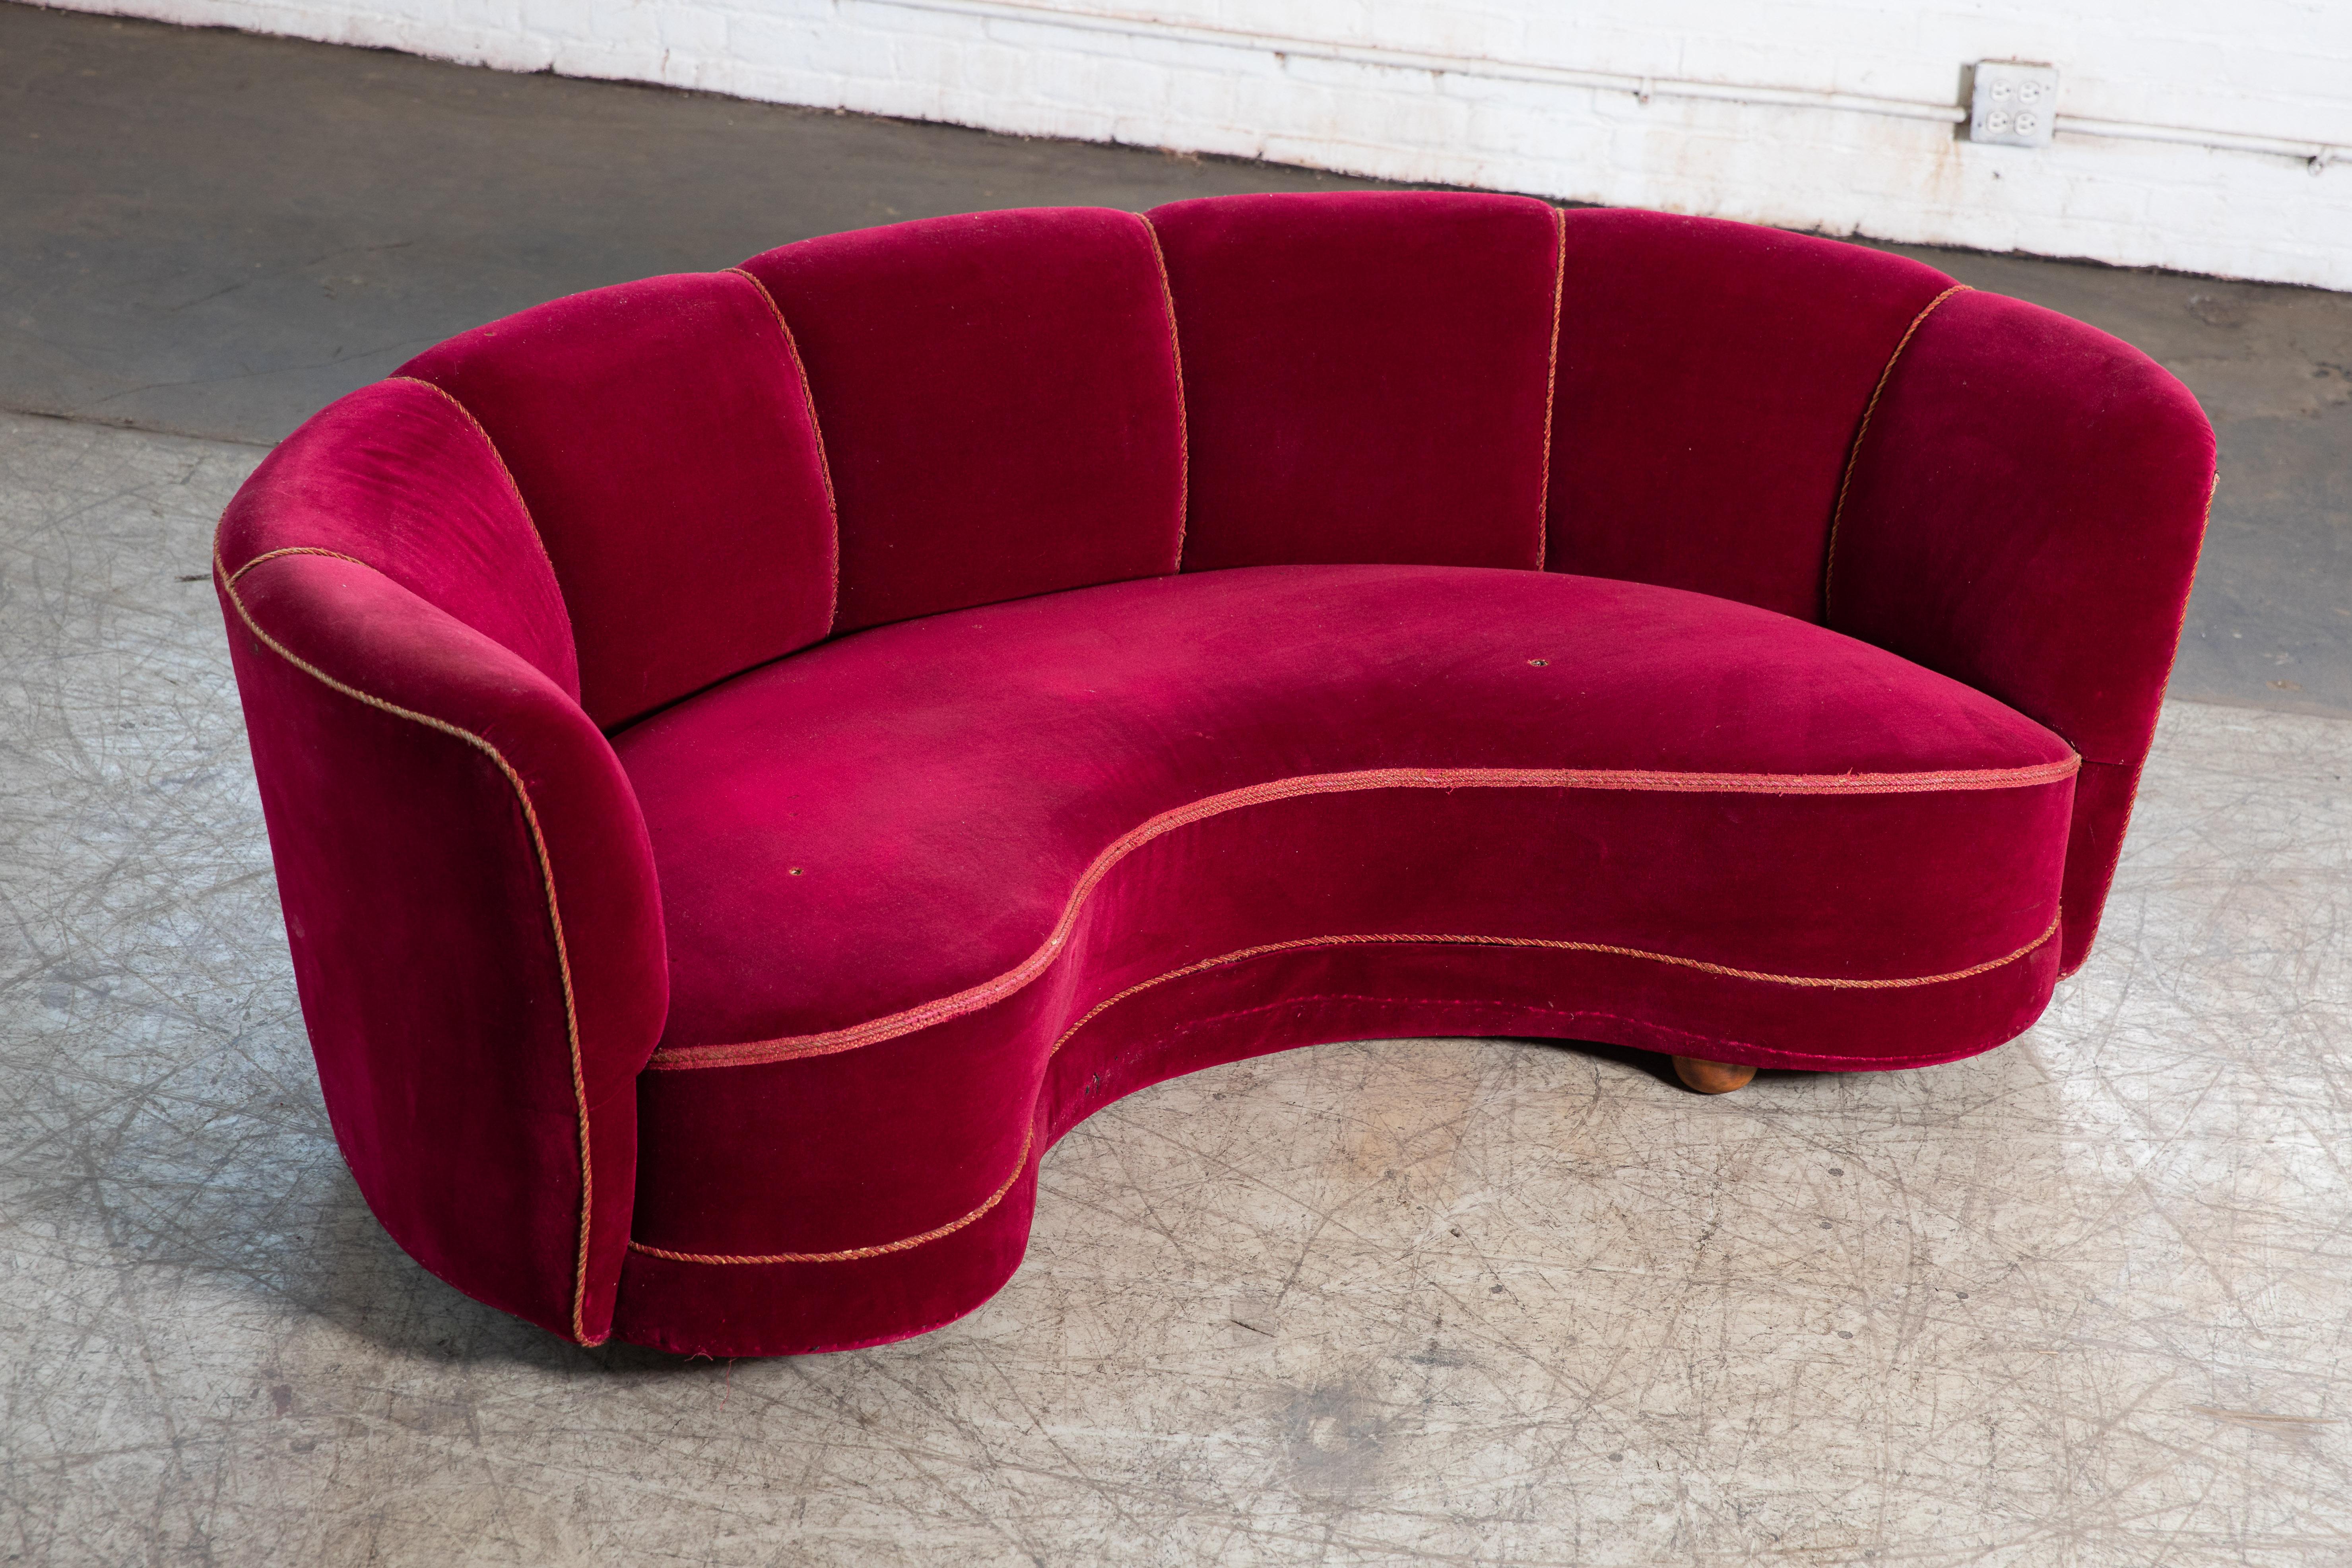 Viggo Boesen style banana shaped or curved sofa made in Denmark, circa 1940. This sofa will make strong statement in any room. Beautiful round voluptuous lines and with large block legs providing a for an elegant and inviting look. Compared to other